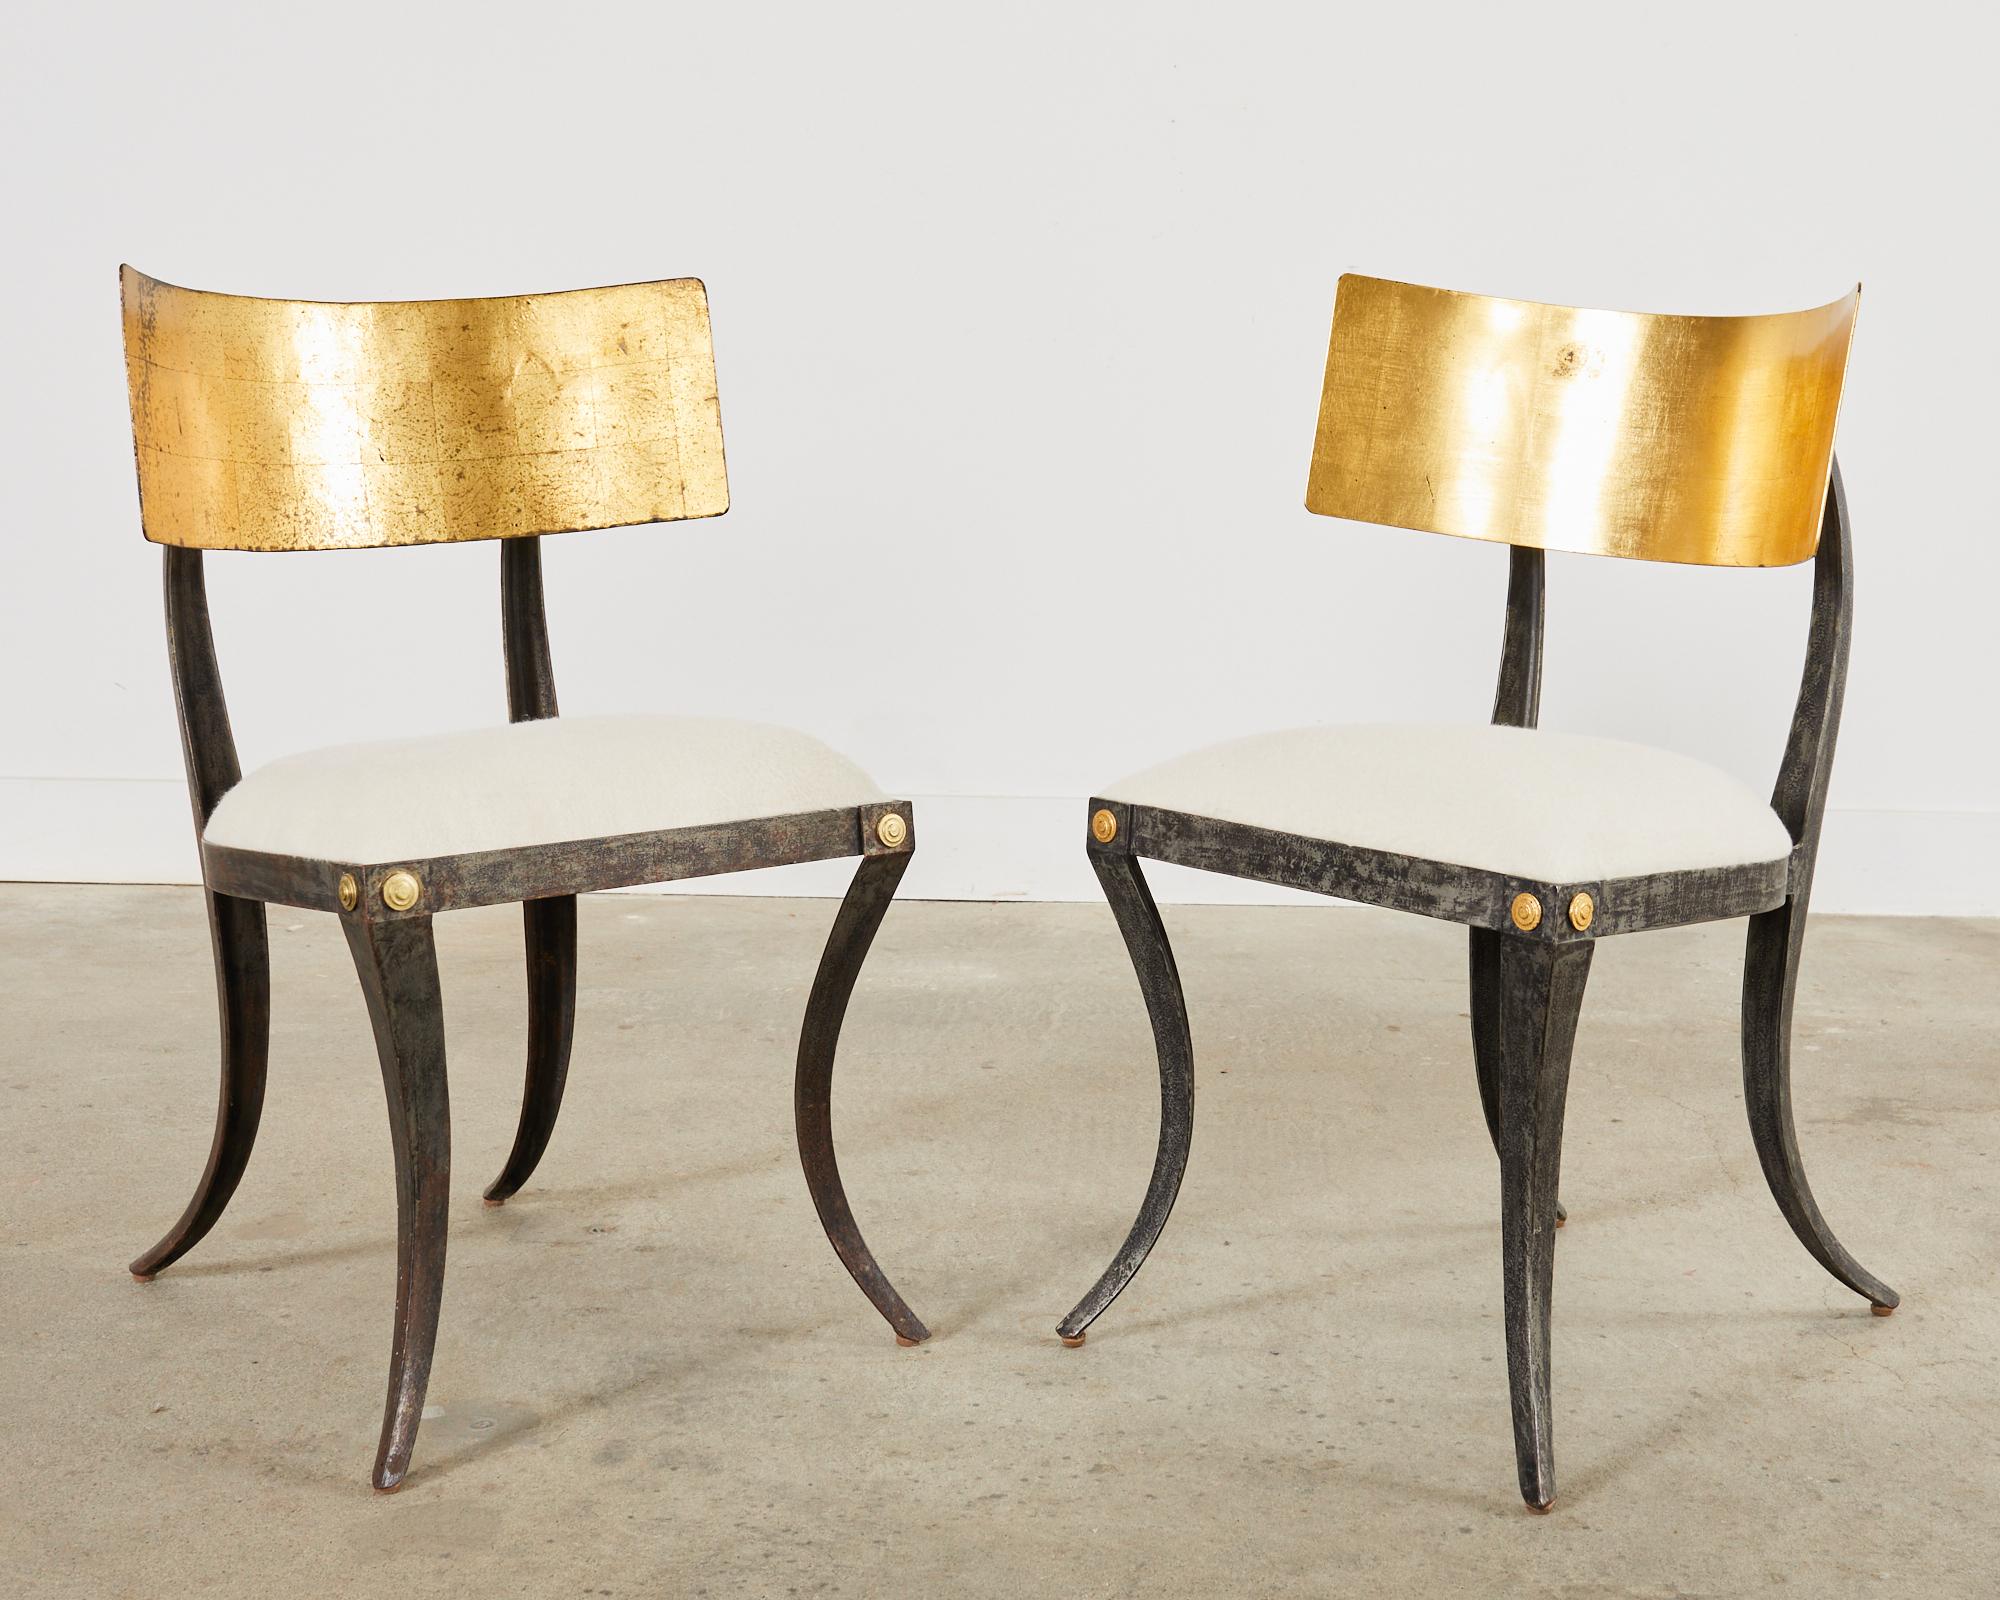 20th Century Set of Four Gilt Iron Klismos Chairs by Ched Berenguer-Topacio For Sale